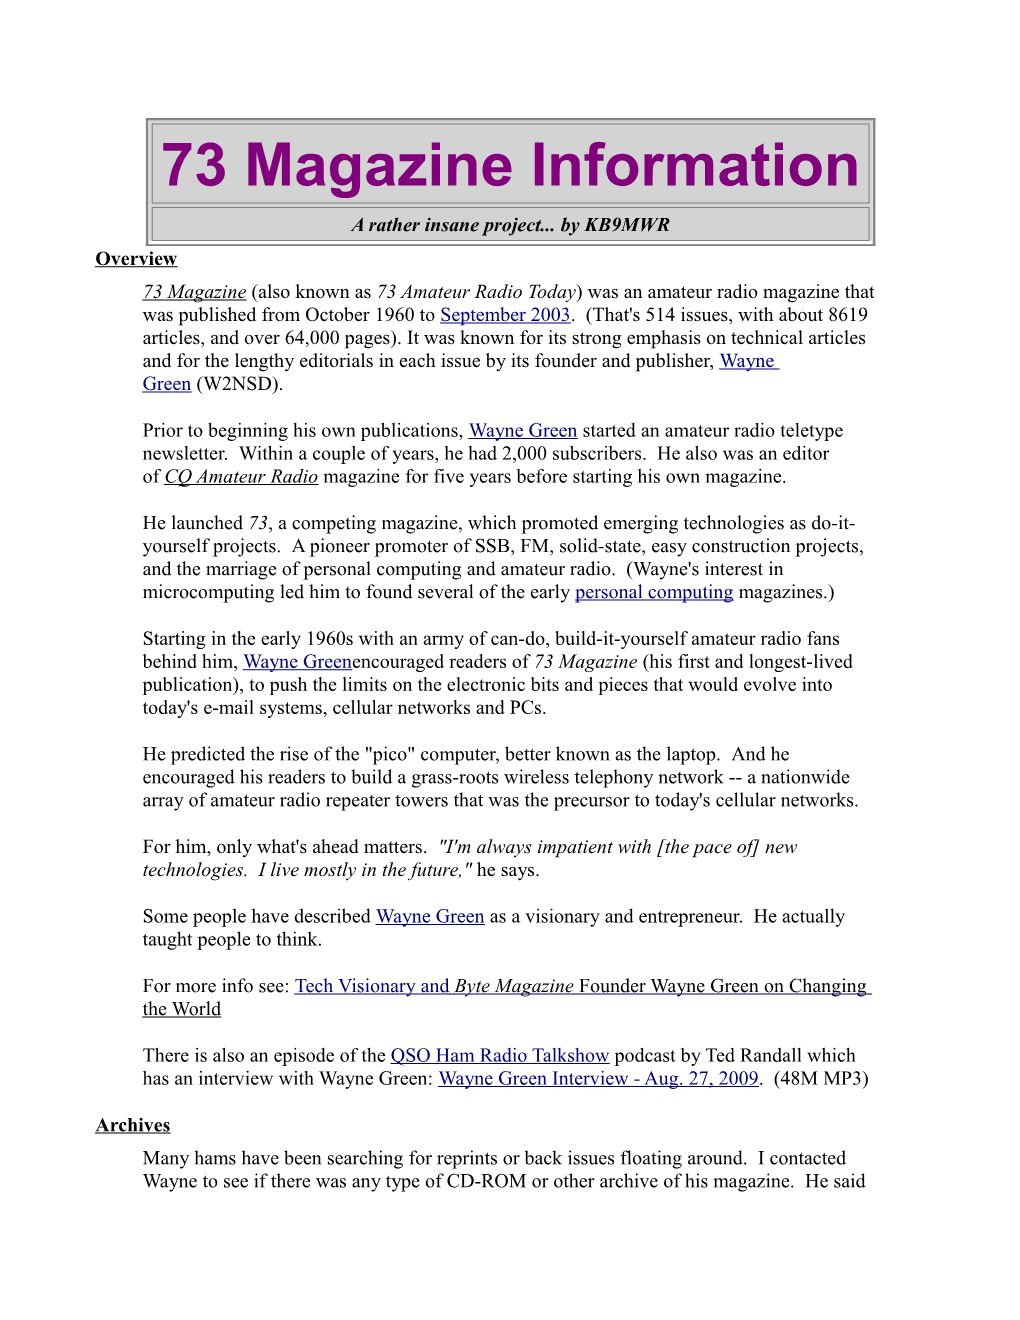 73 Magazine Information a Rather Insane Project